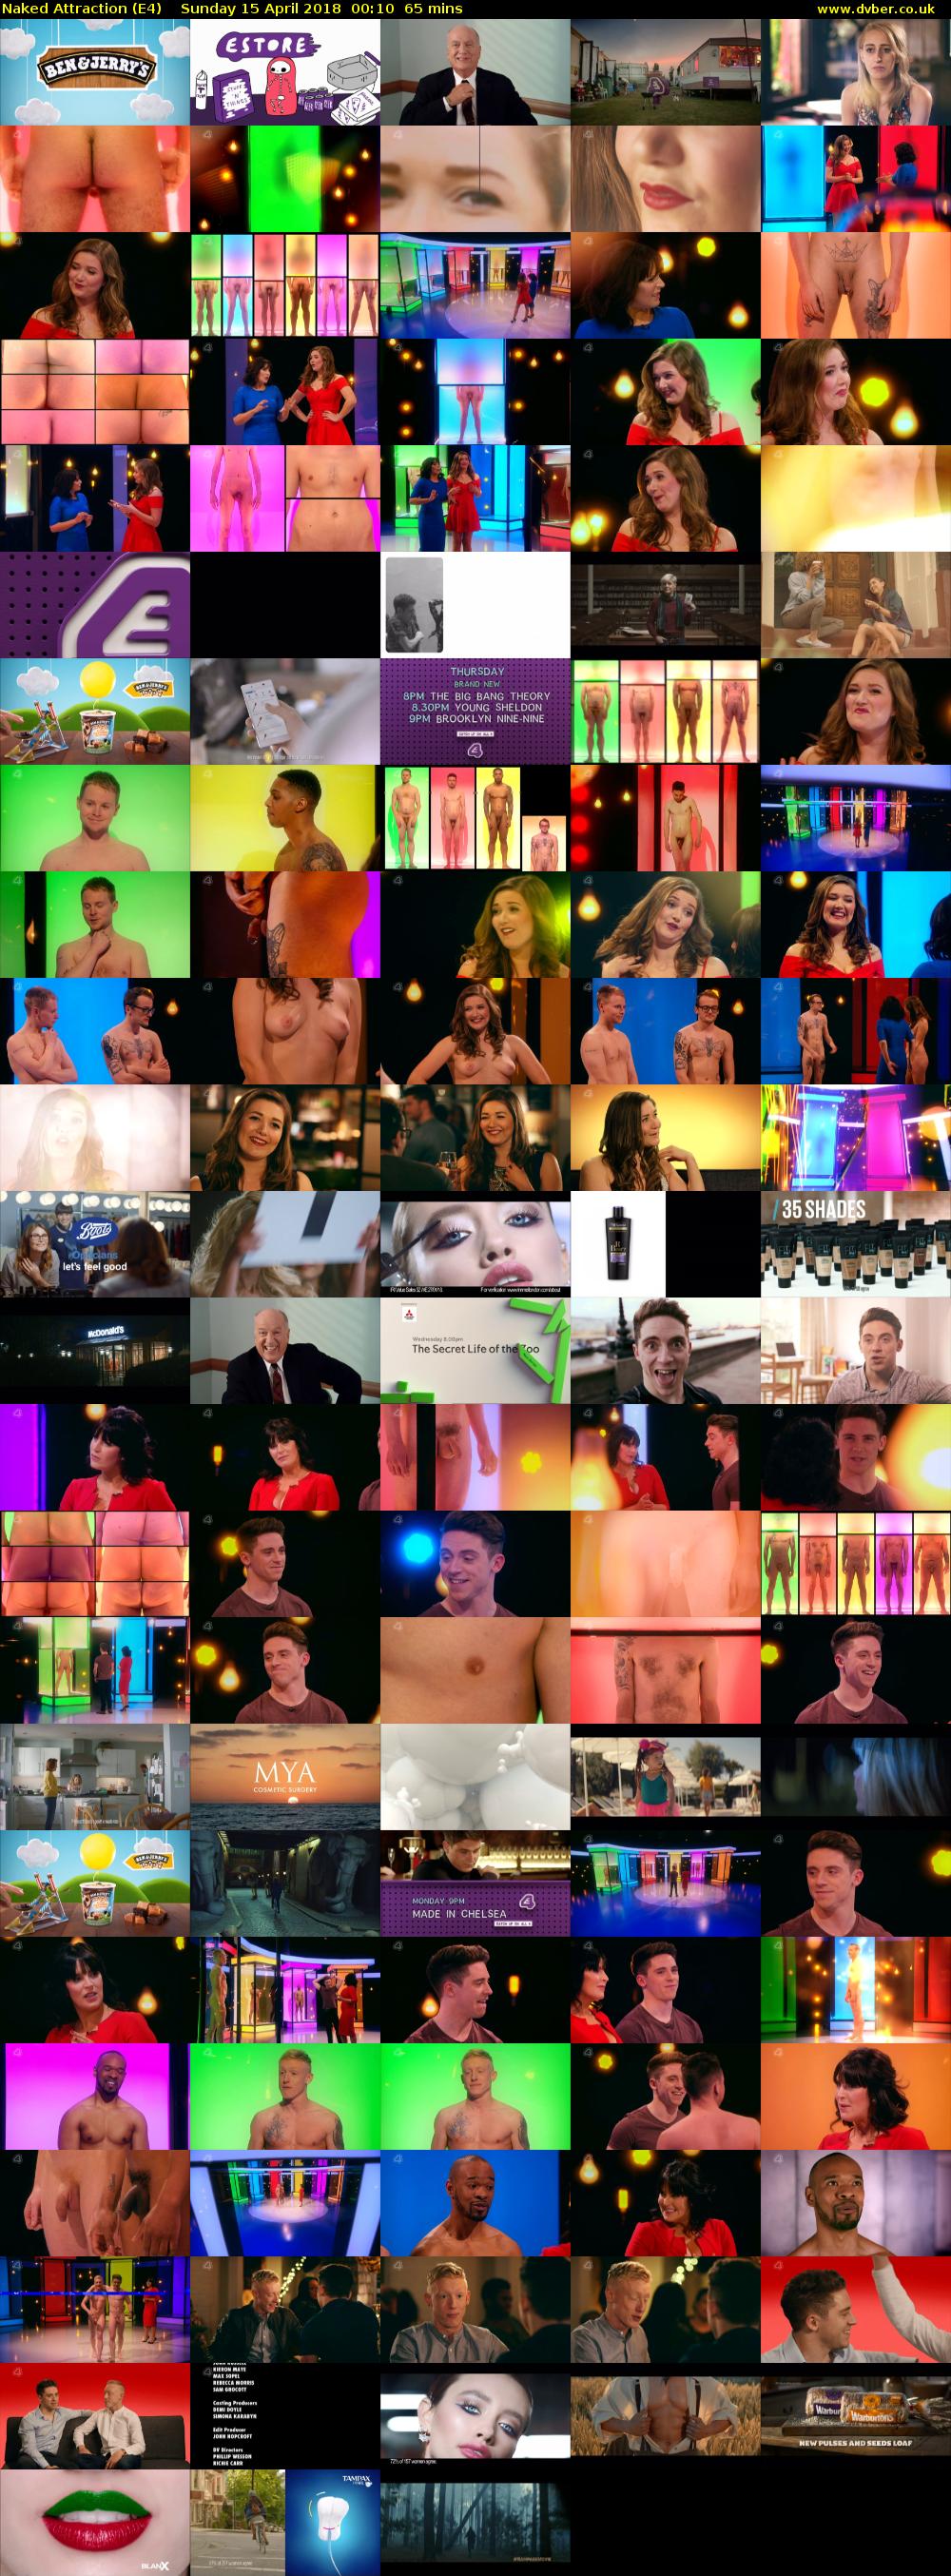 Naked Attraction (E4) Sunday 15 April 2018 00:10 - 01:15